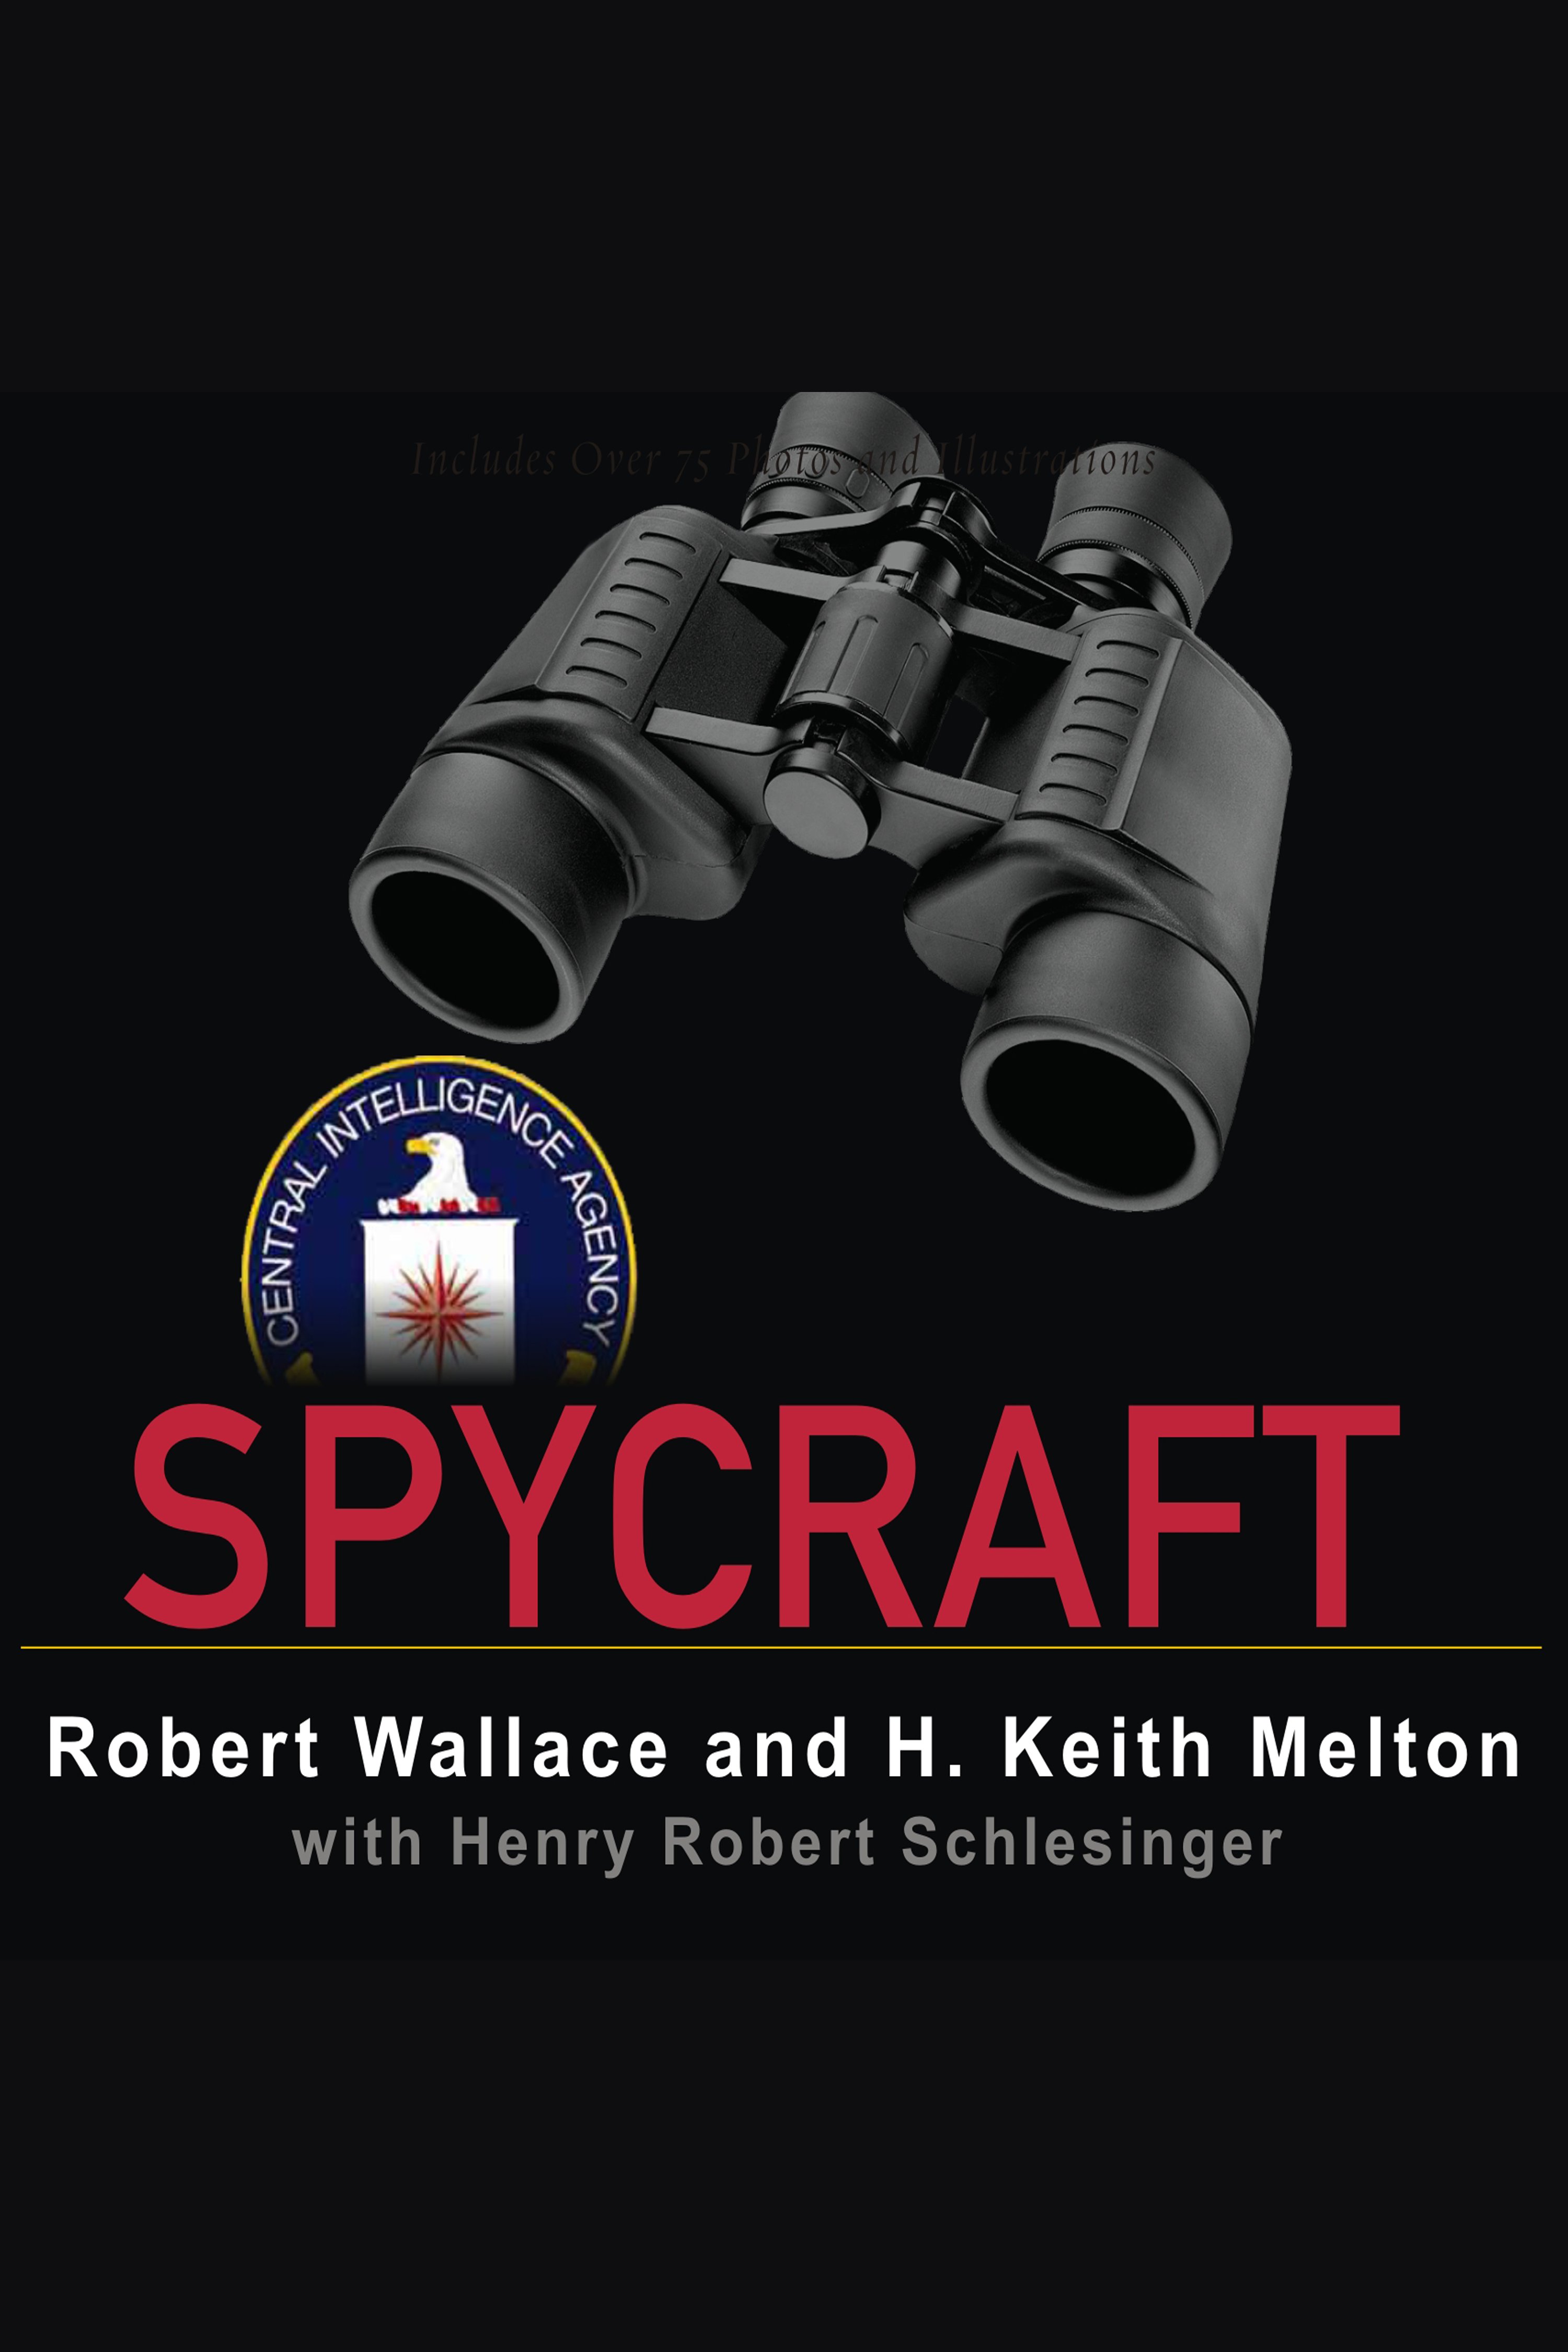 Spycraft the secret history of the CIA's spytechs from Communism to Al-Qaeda cover image